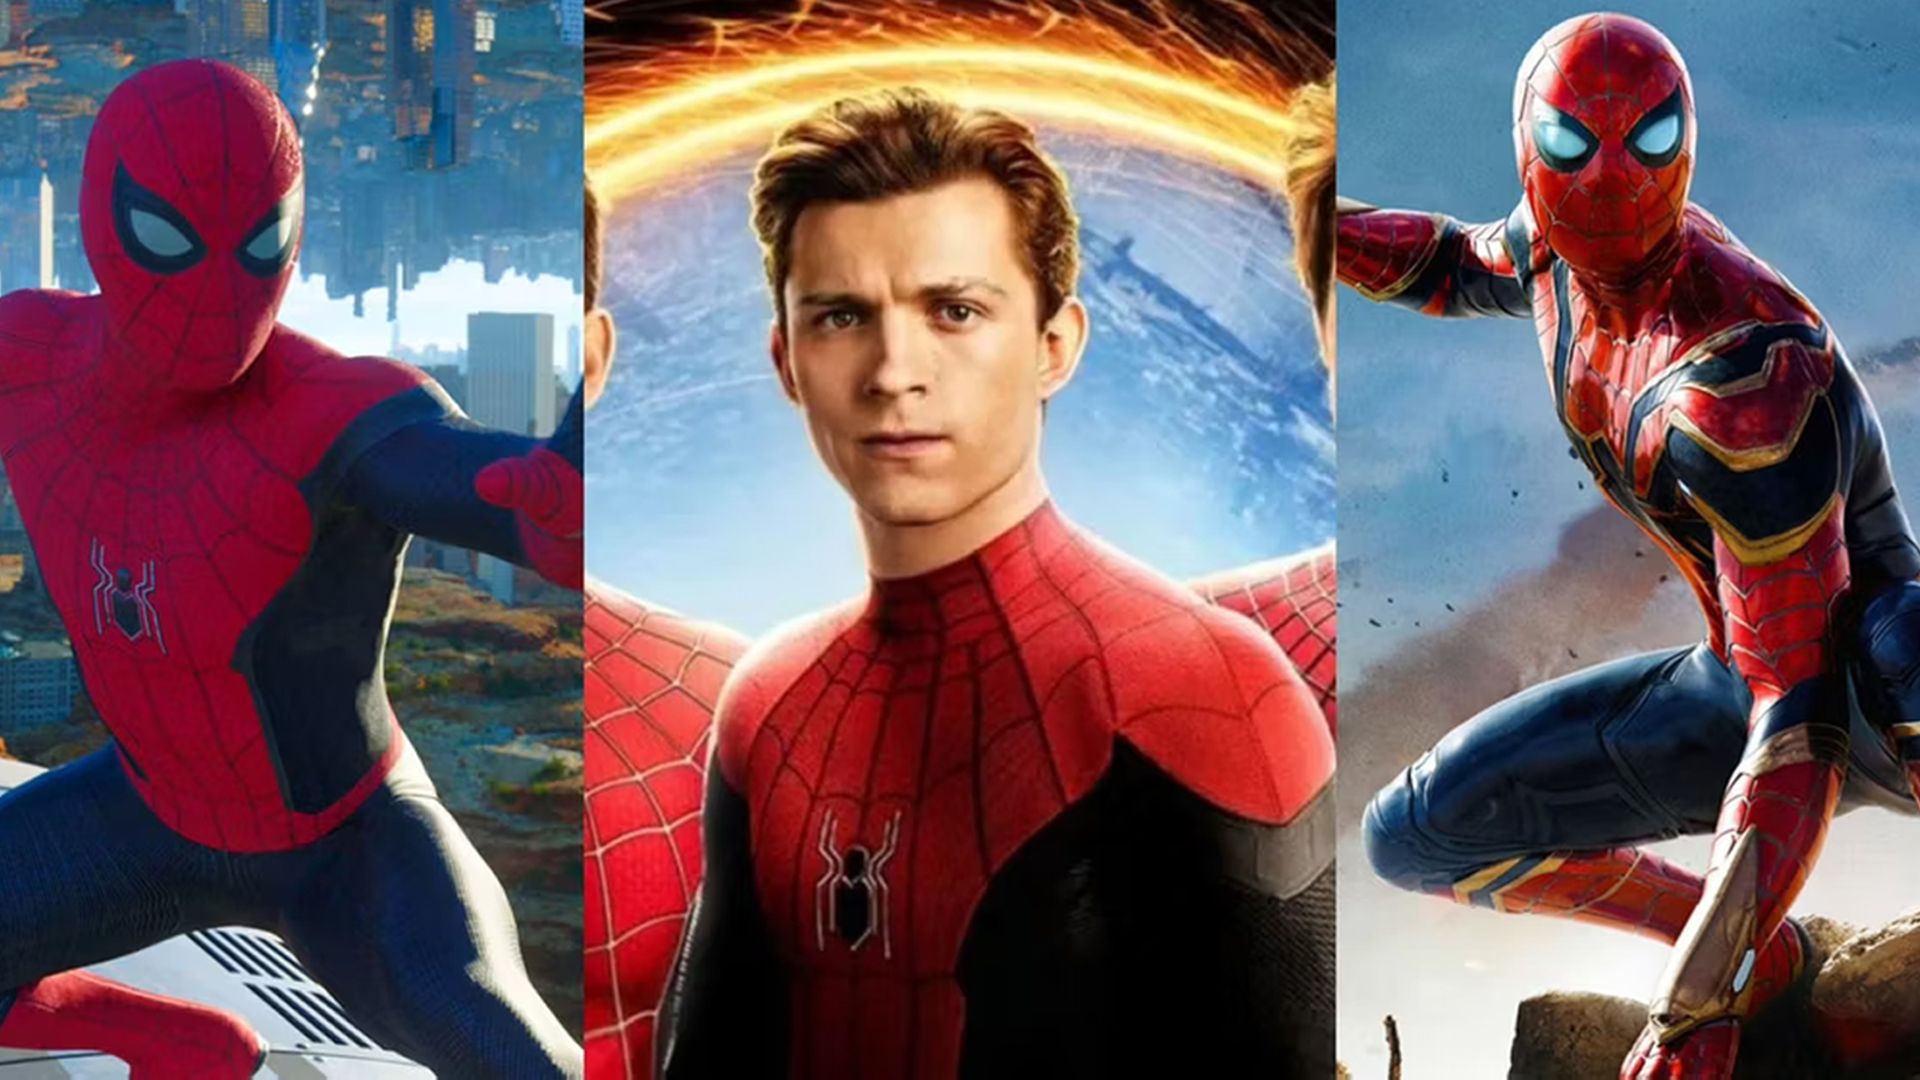 10 MCU Spider-Man Scenes No Other Spider-Man Movies Could Pull Off